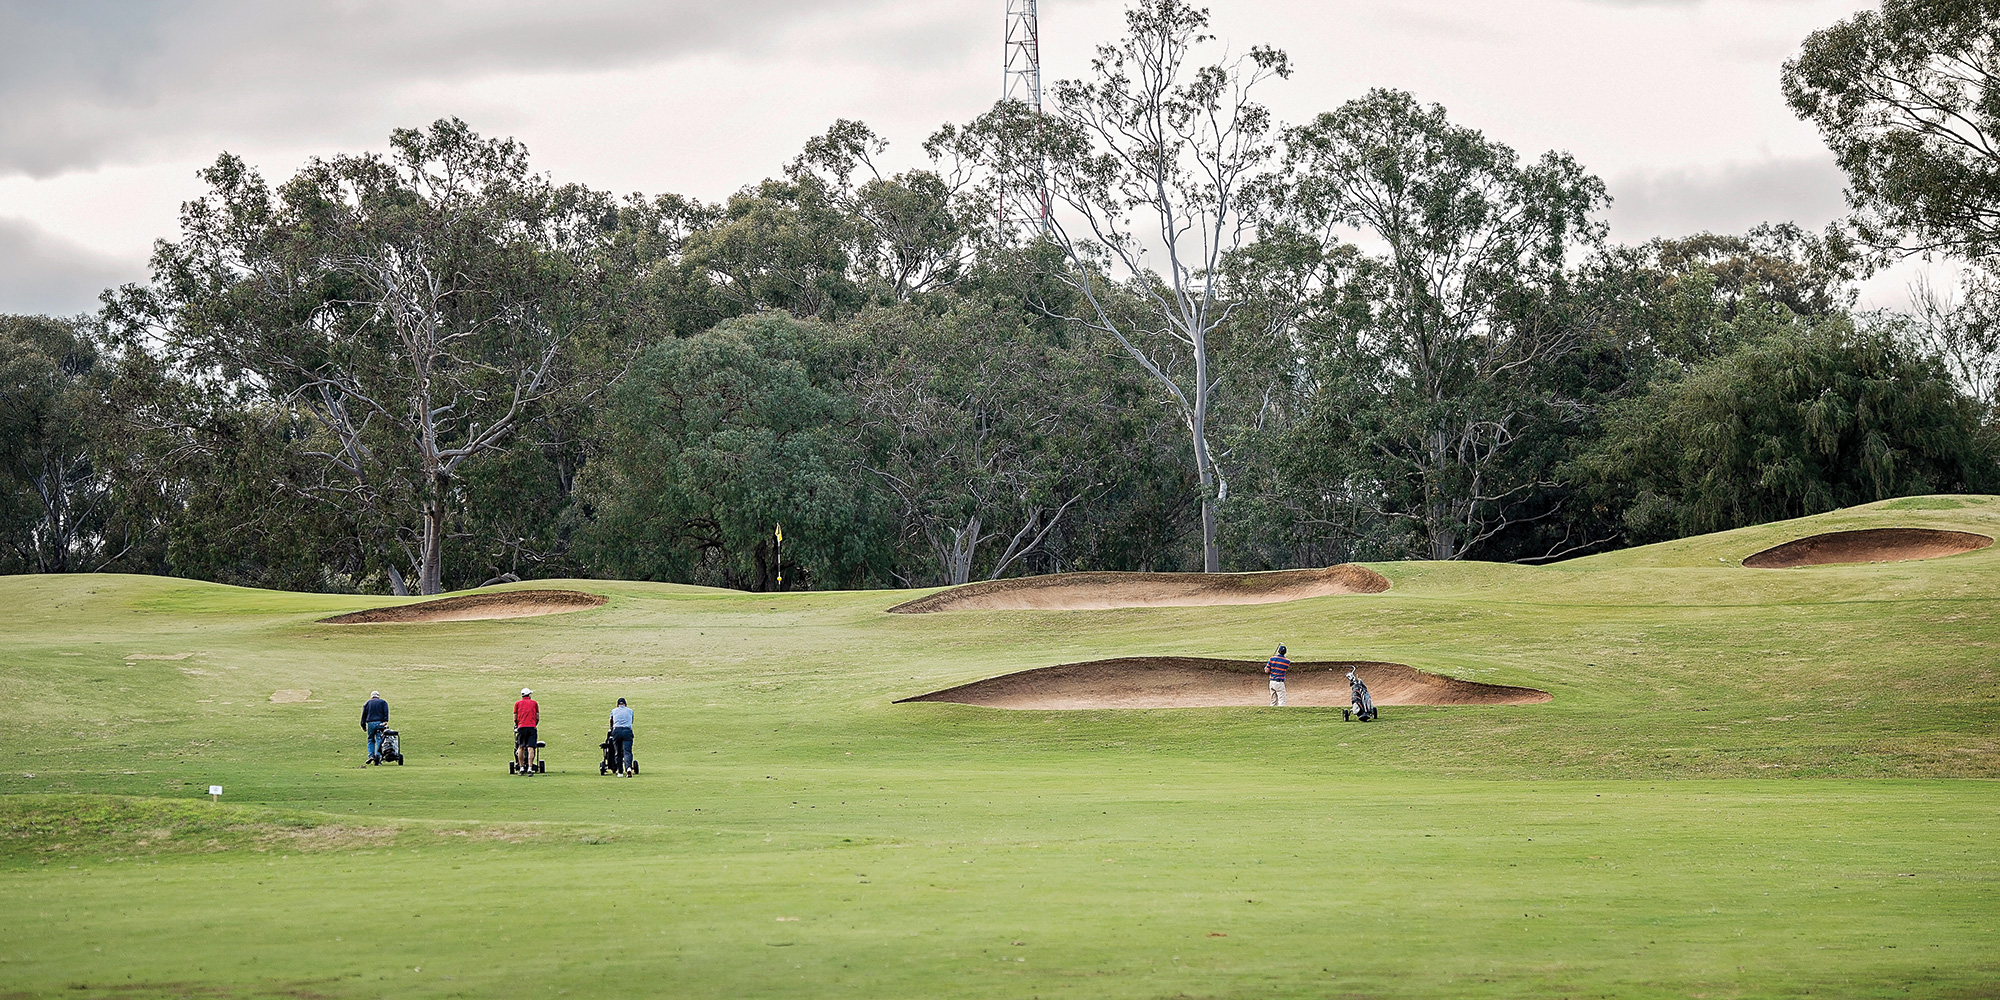 Thomson kept the bunkering subtler and chose to work within the stands of majestic river gums at Yarrawonga Mulwala.